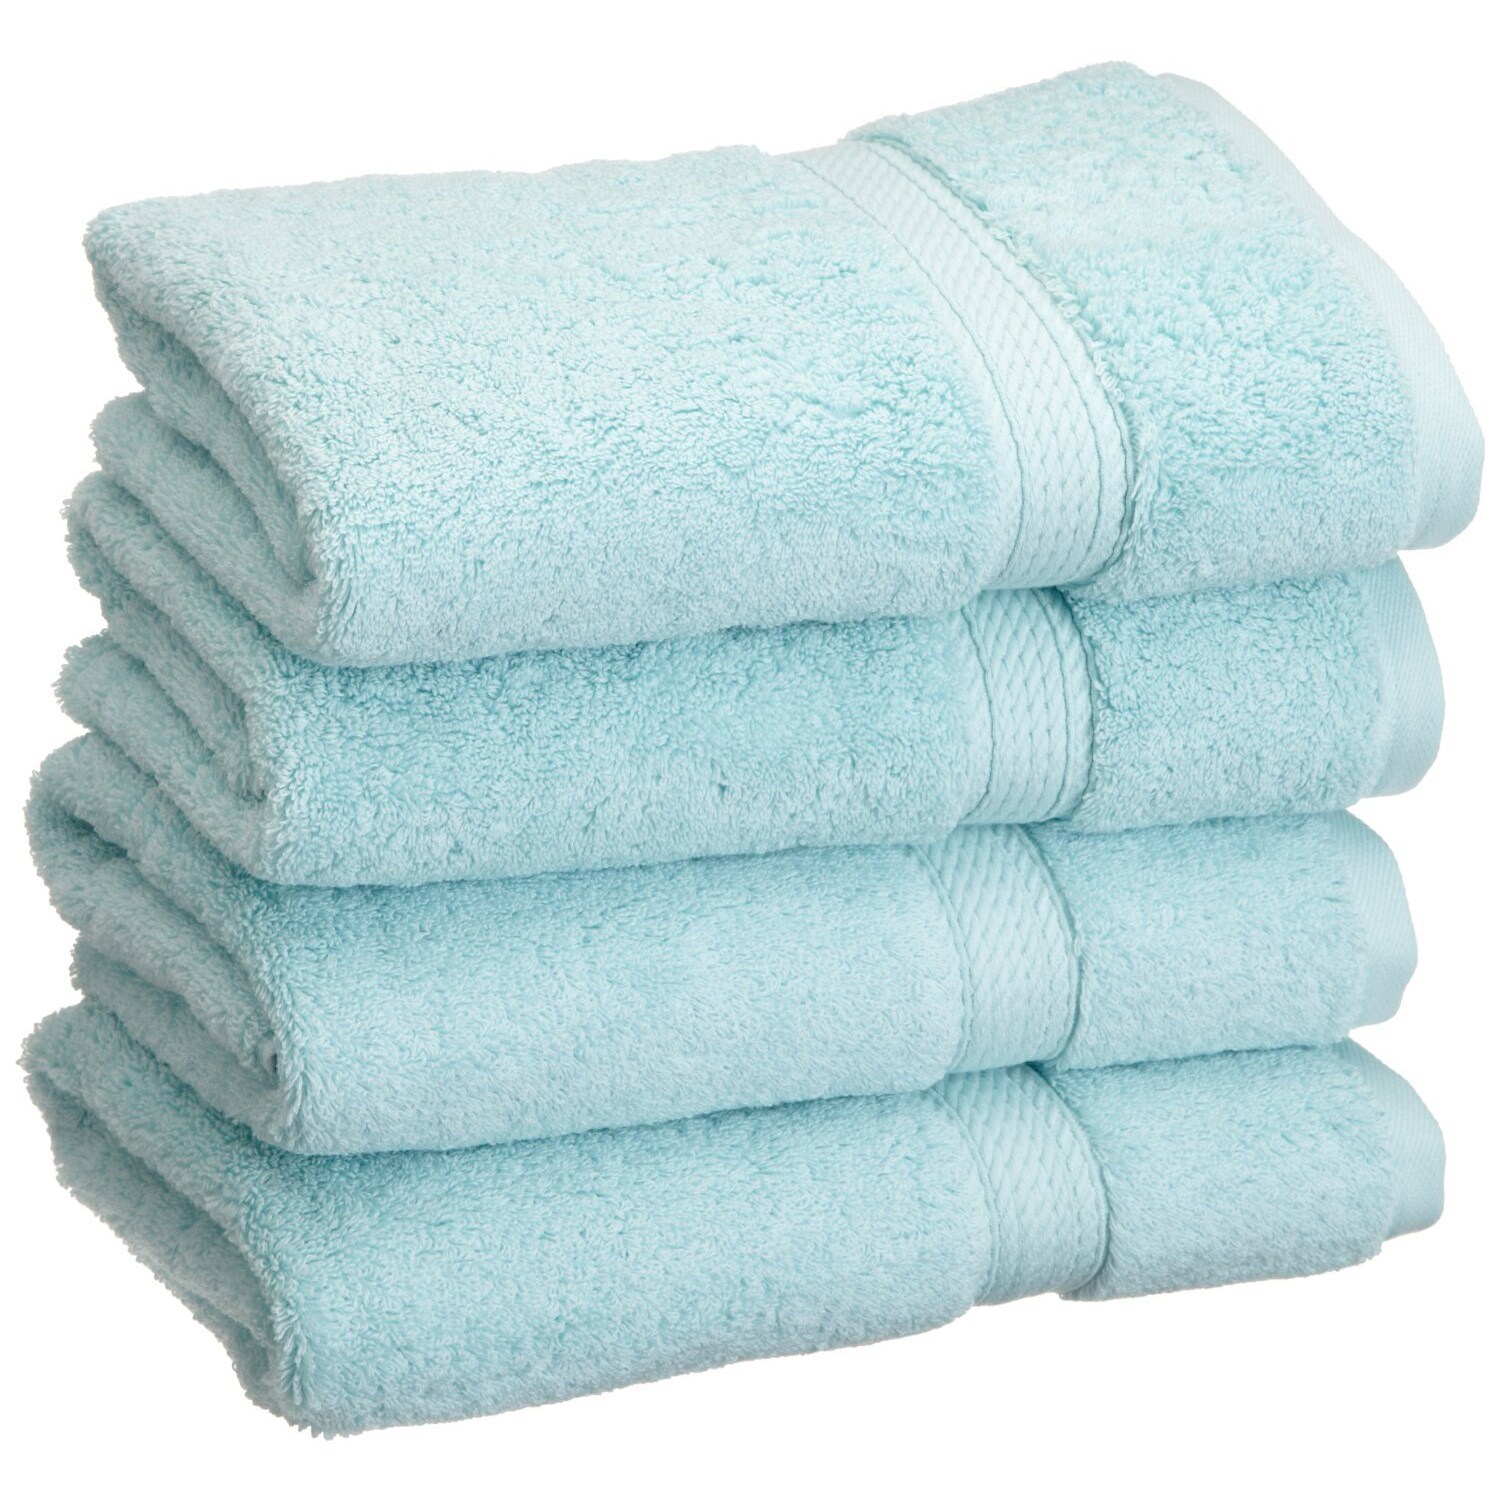 https://ak1.ostkcdn.com/images/products/5841944/Superior-Luxurious-and-Absorbent-900-GSM-Combed-Cotton-Hand-Towel-Set-of-4-84e01b18-9559-4962-8d7a-dc004b35f963.jpg